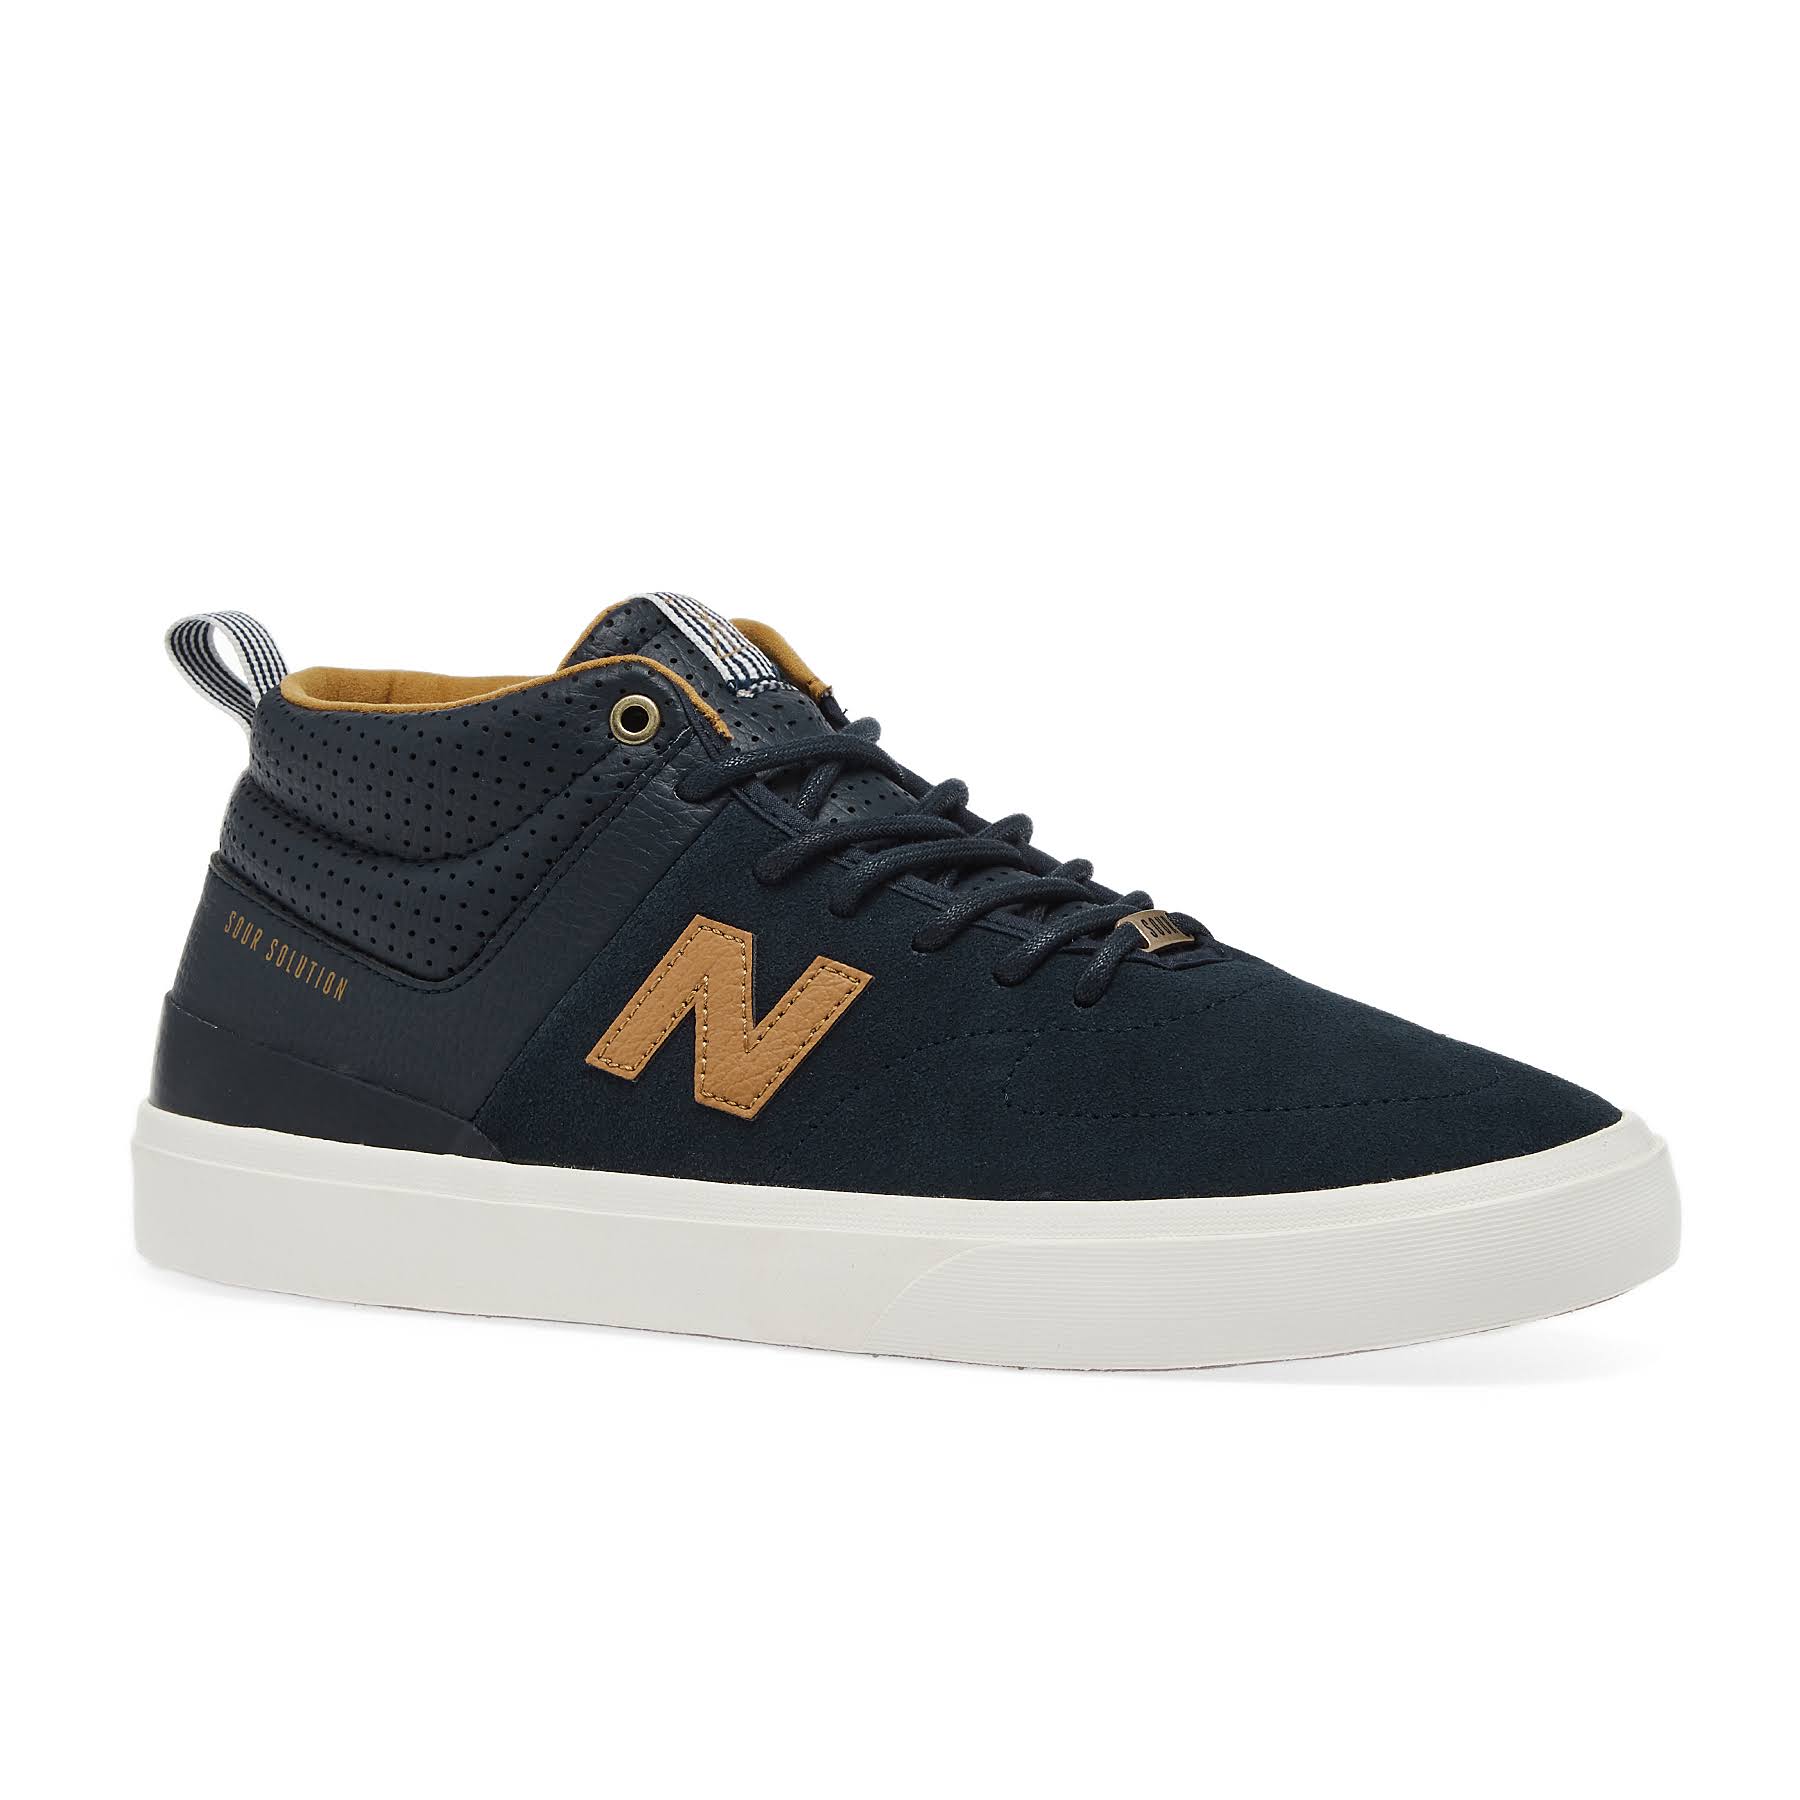 New Balance Numeric 379 Mid Sour Soloution Mens Shoes - Navy